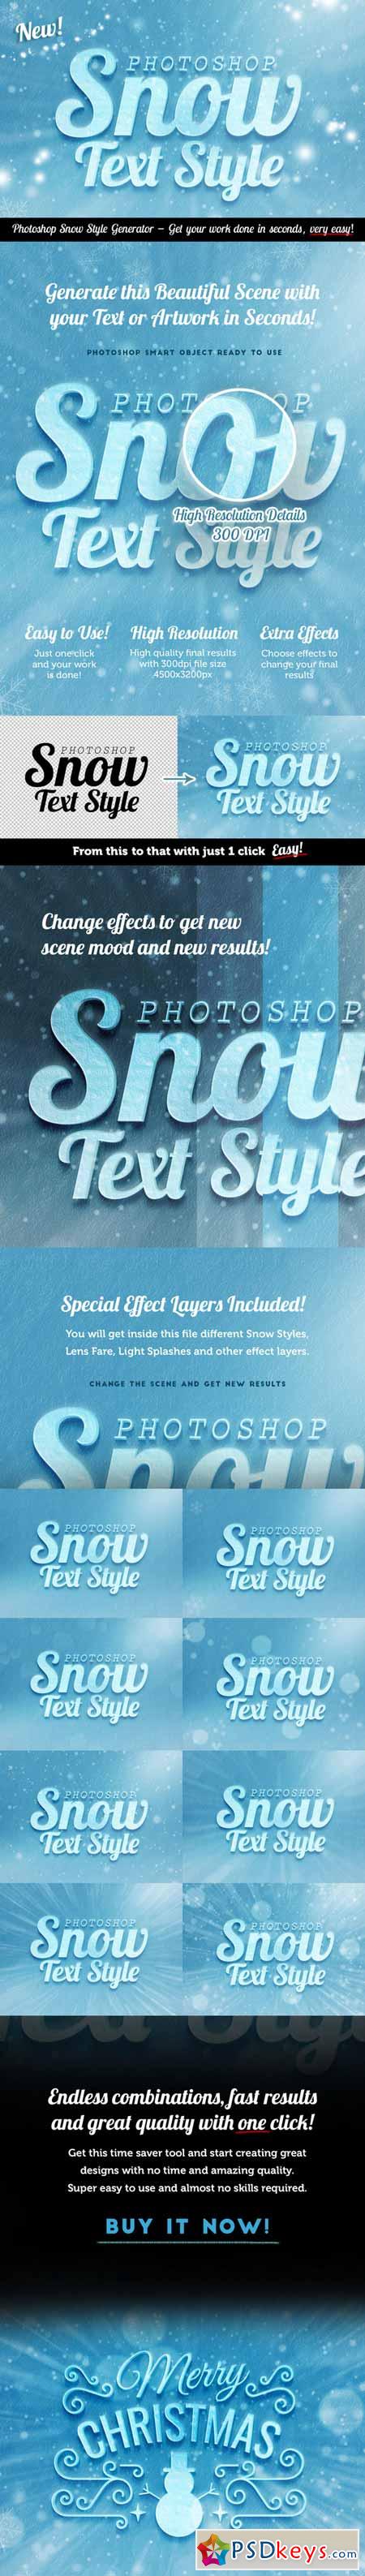 Snow Text Effect Psd for Photoshop 464267